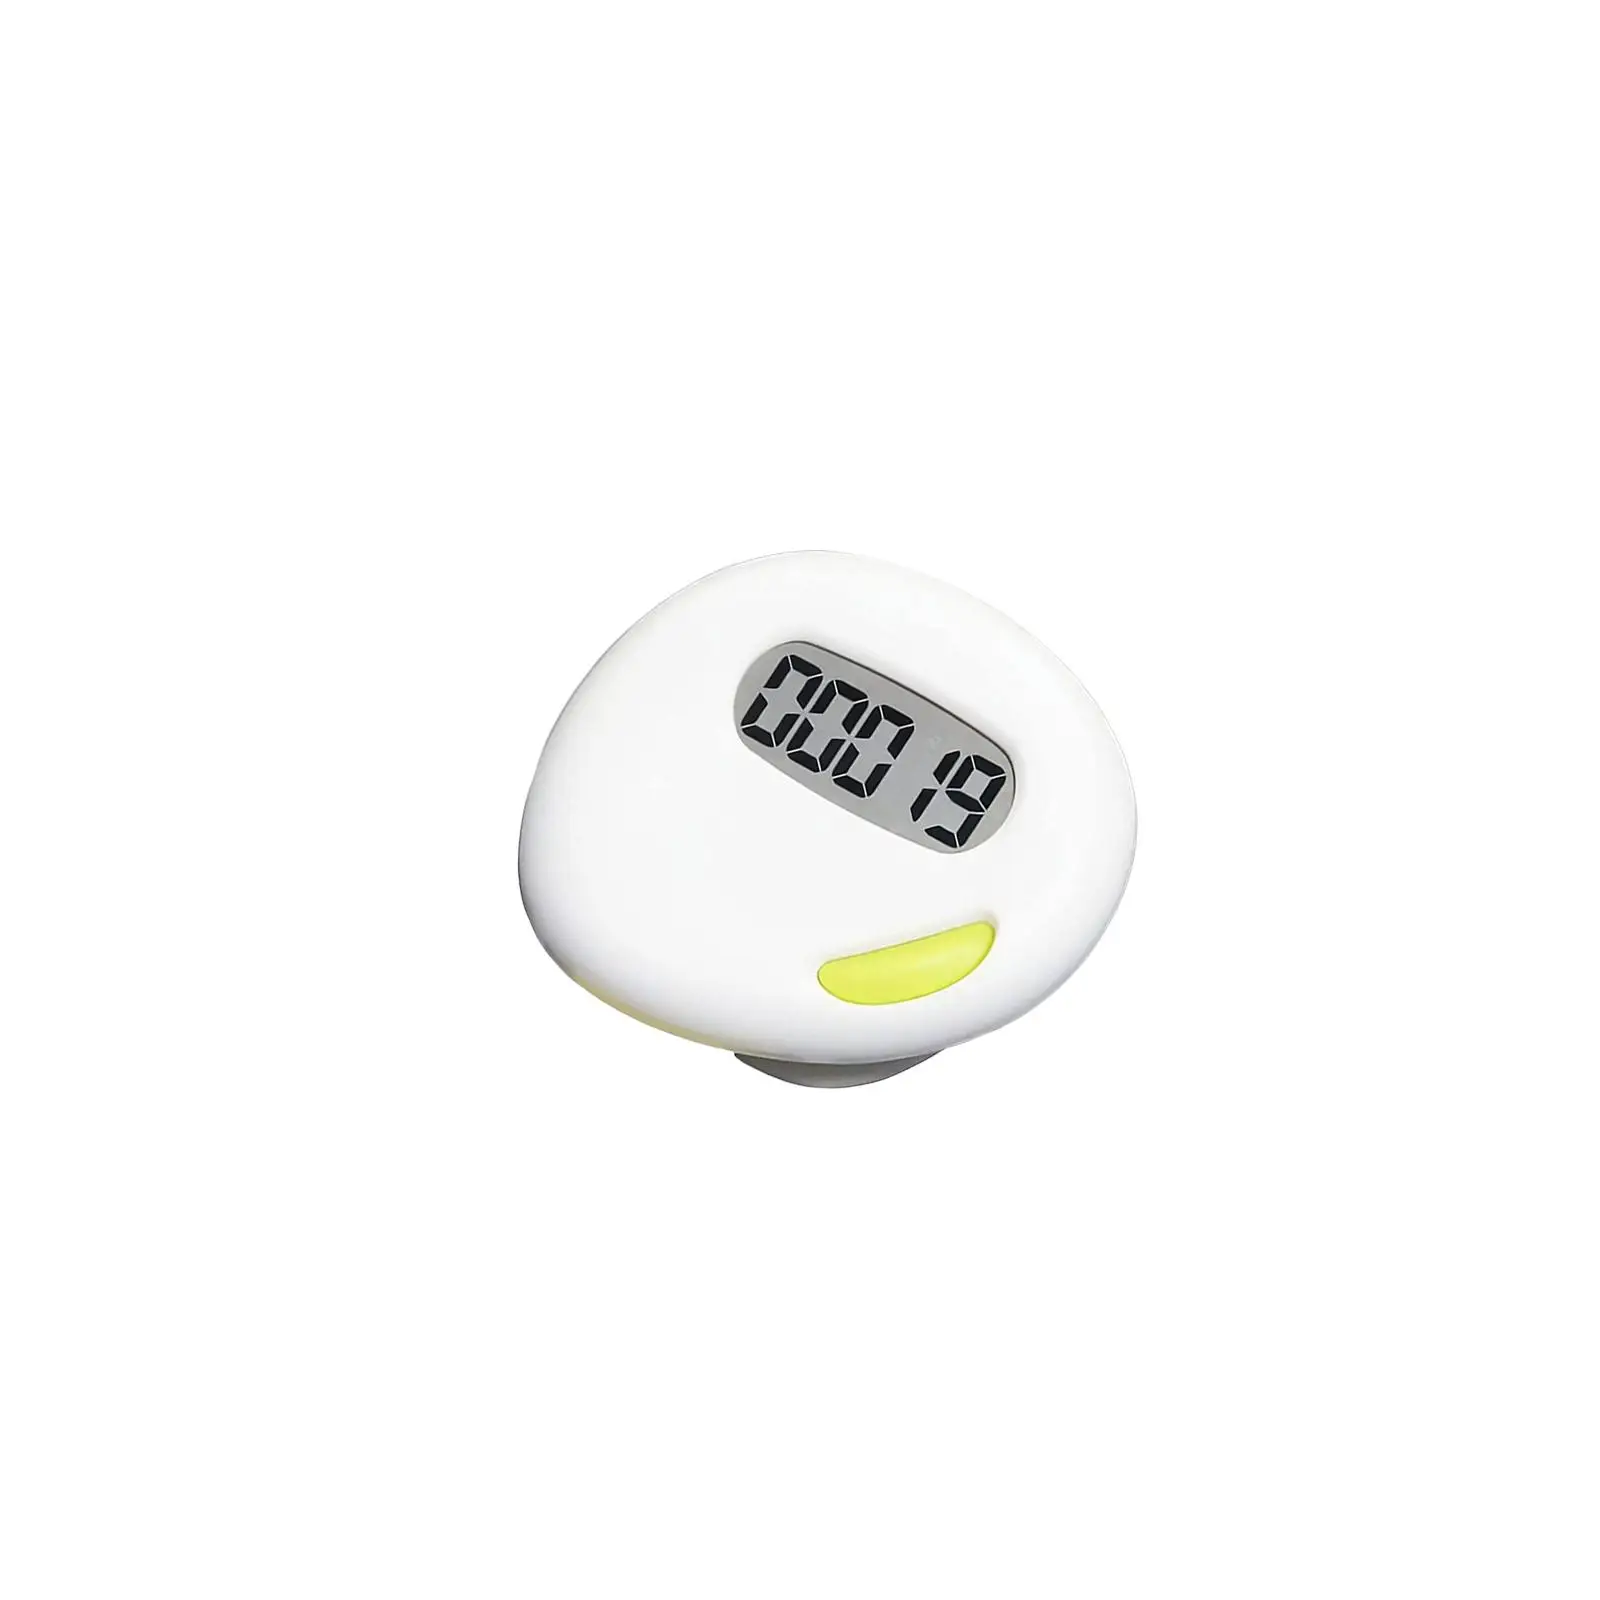 Multifunctional 2D Digital Pedometer Exercise Walk Motion Calorie Distance Counting Electronic Pedometer for Running Women Men